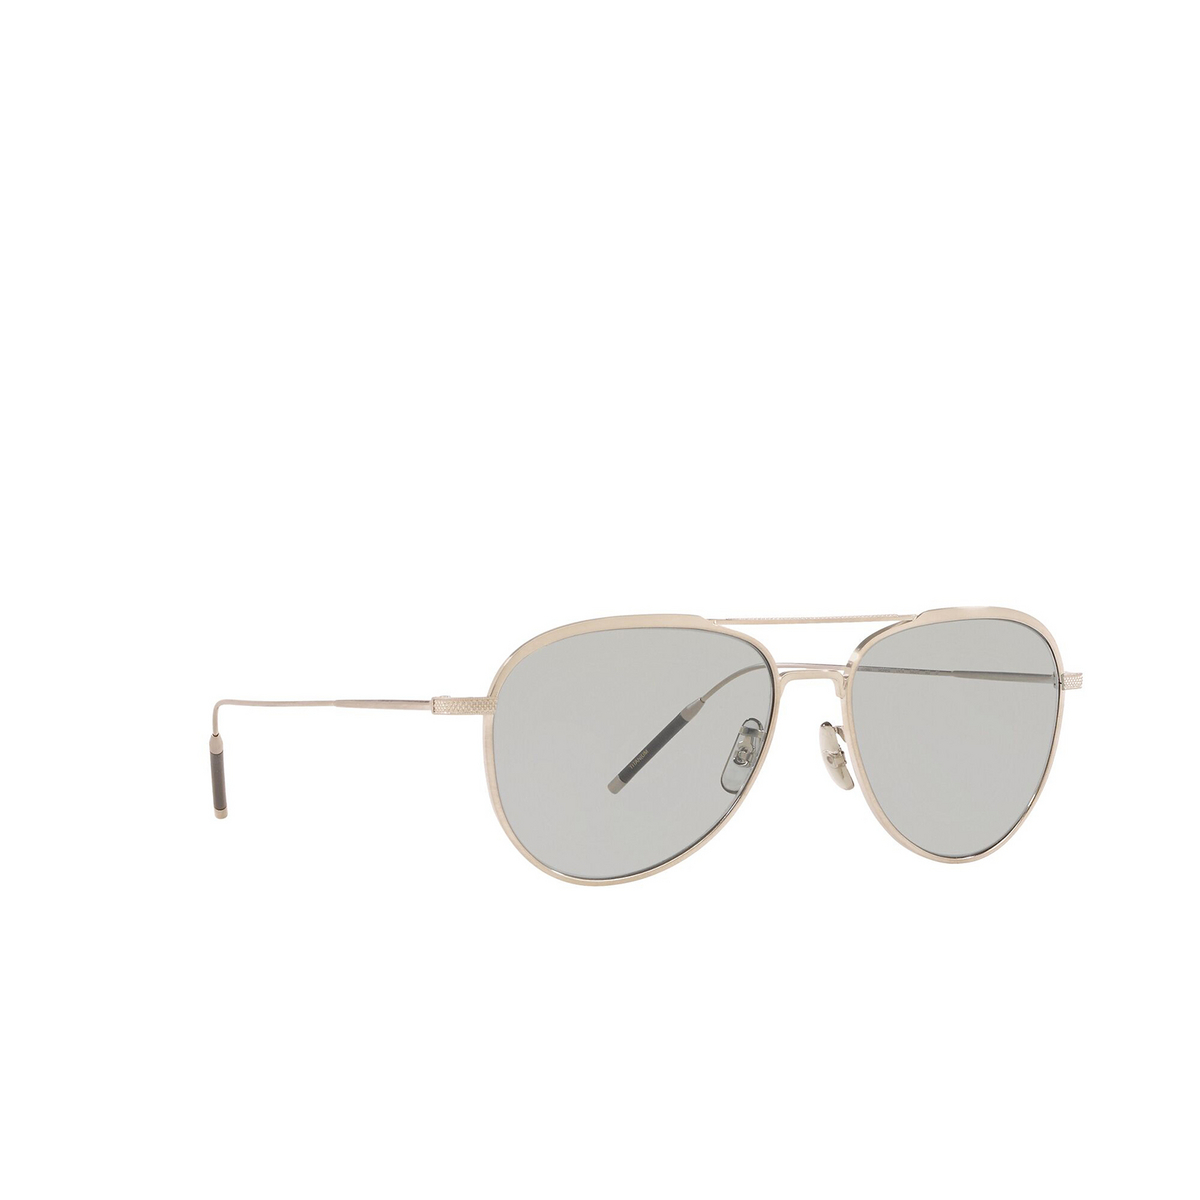 Oliver Peoples® Aviator Sunglasses: Tk-3 OV1276ST color Brushed Silver 5254R5 - three-quarters view.